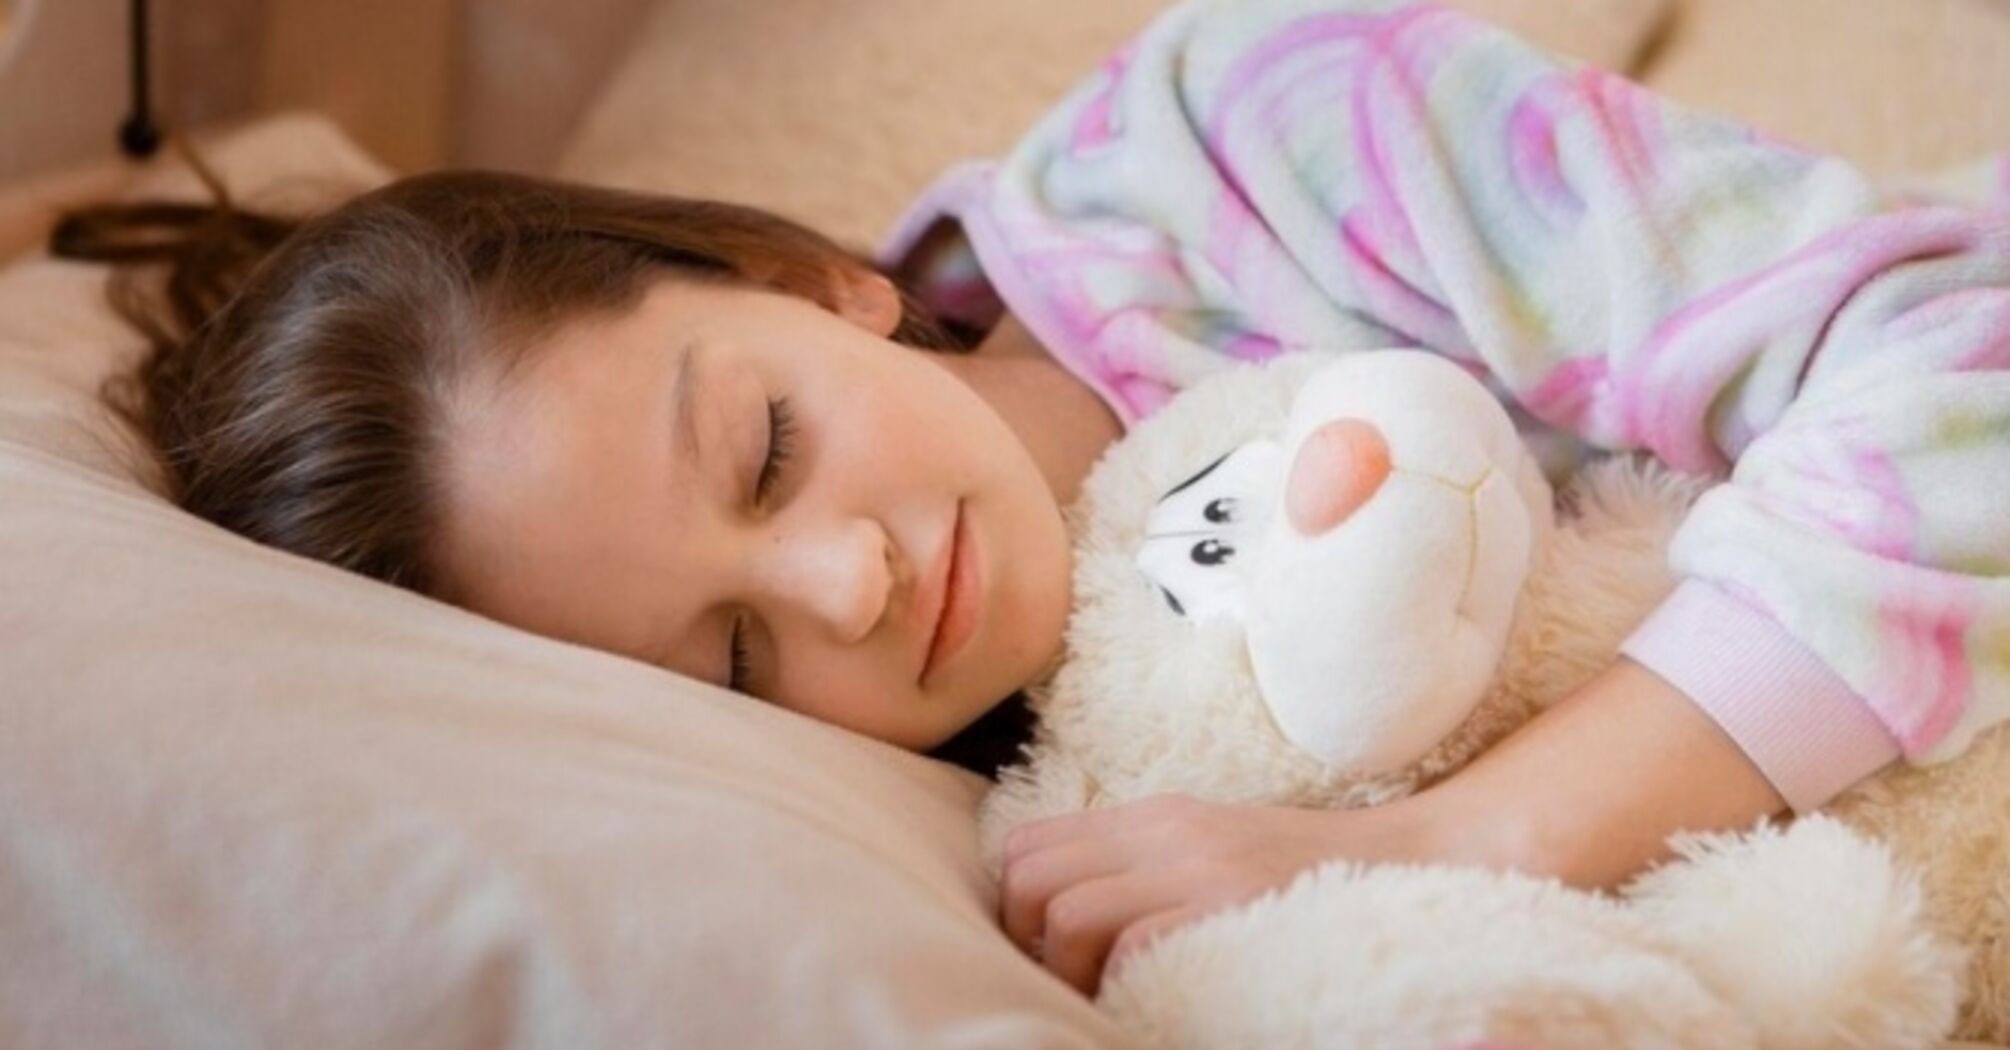 How to prepare your child for a healthy sleep routine